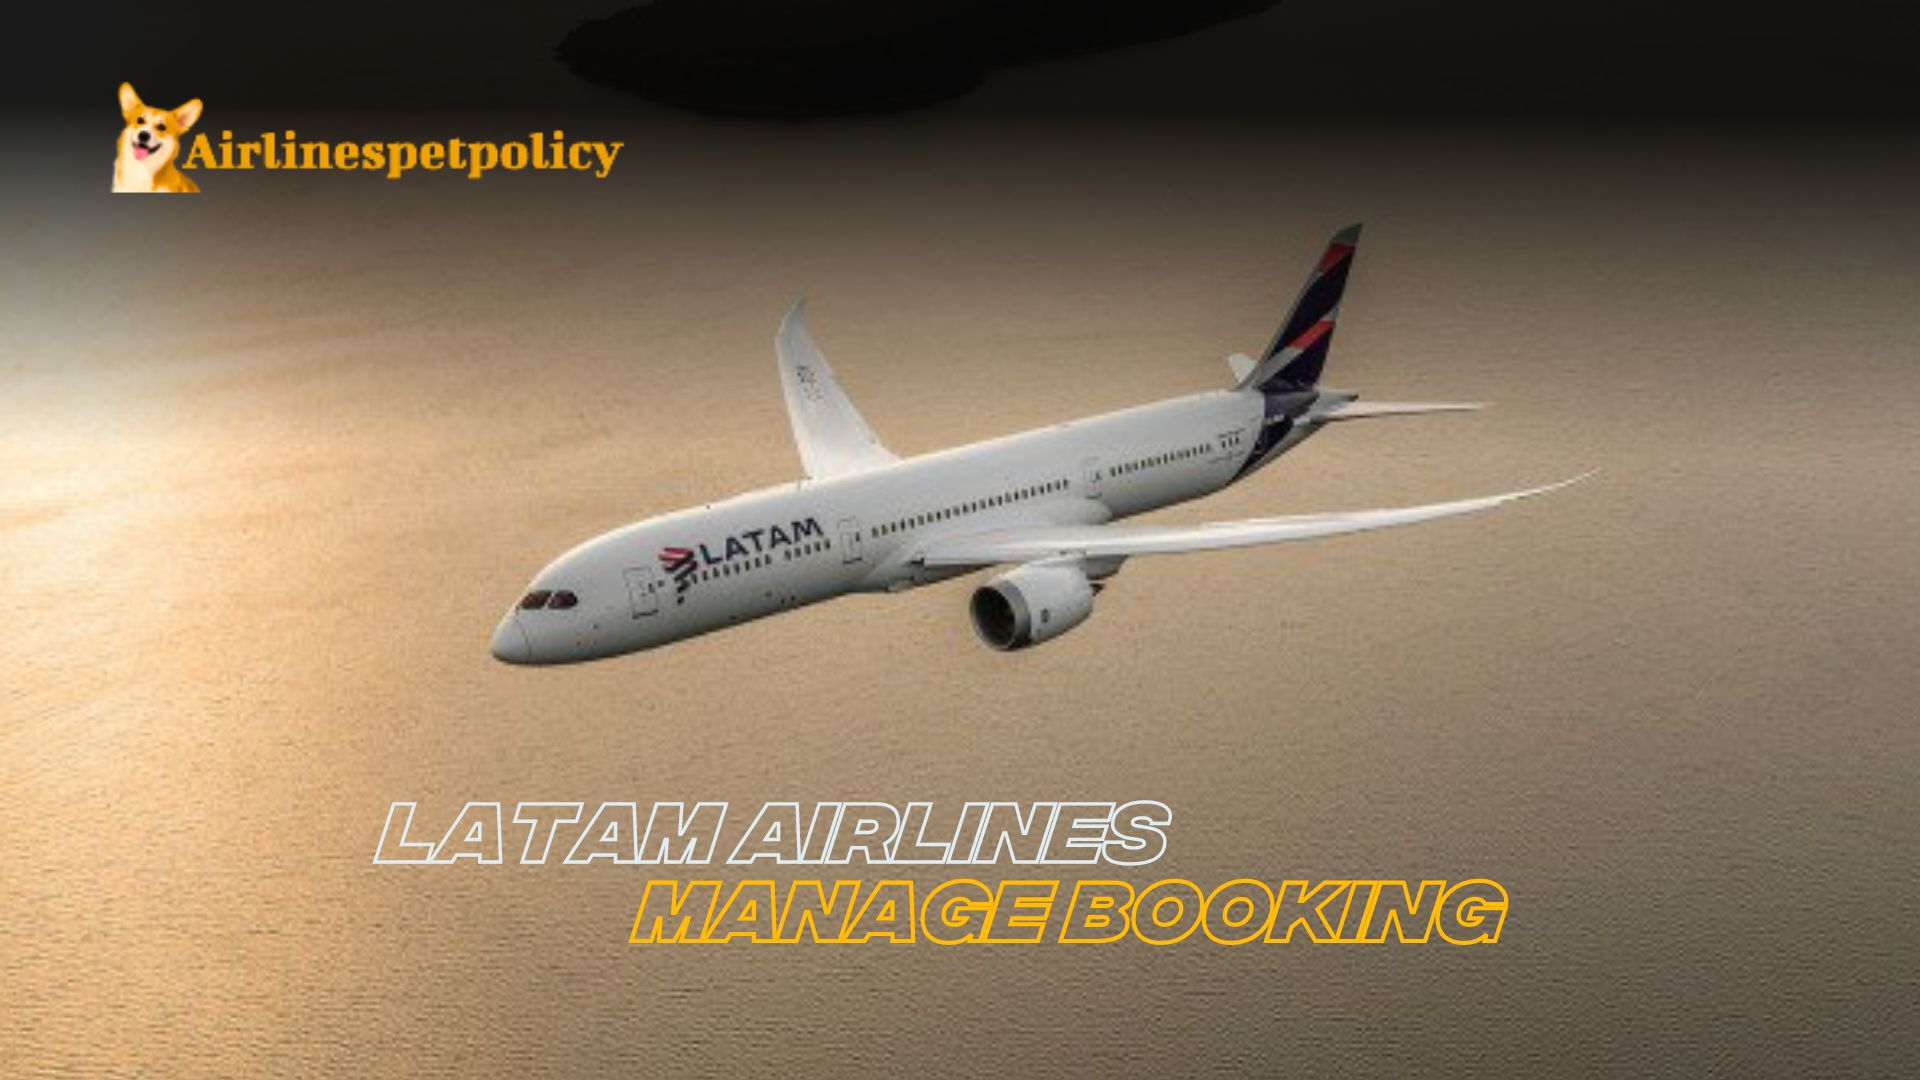 LATAM Airlines Manage Booking | Reservation & Services